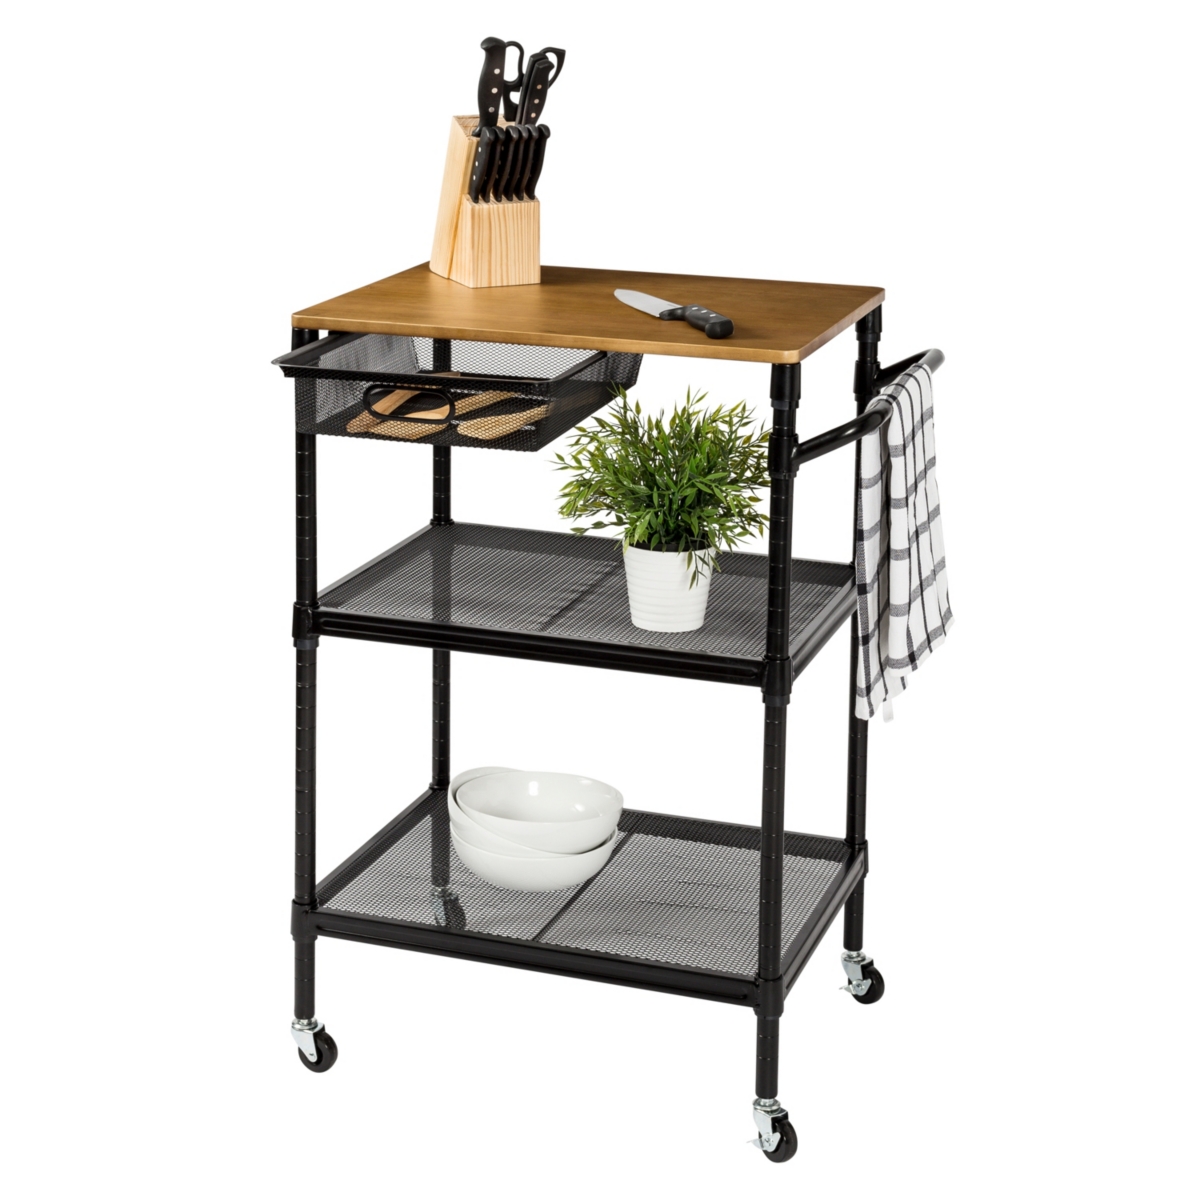 36" Kitchen Cart with Wheels, Storage Drawer and Handle - Black